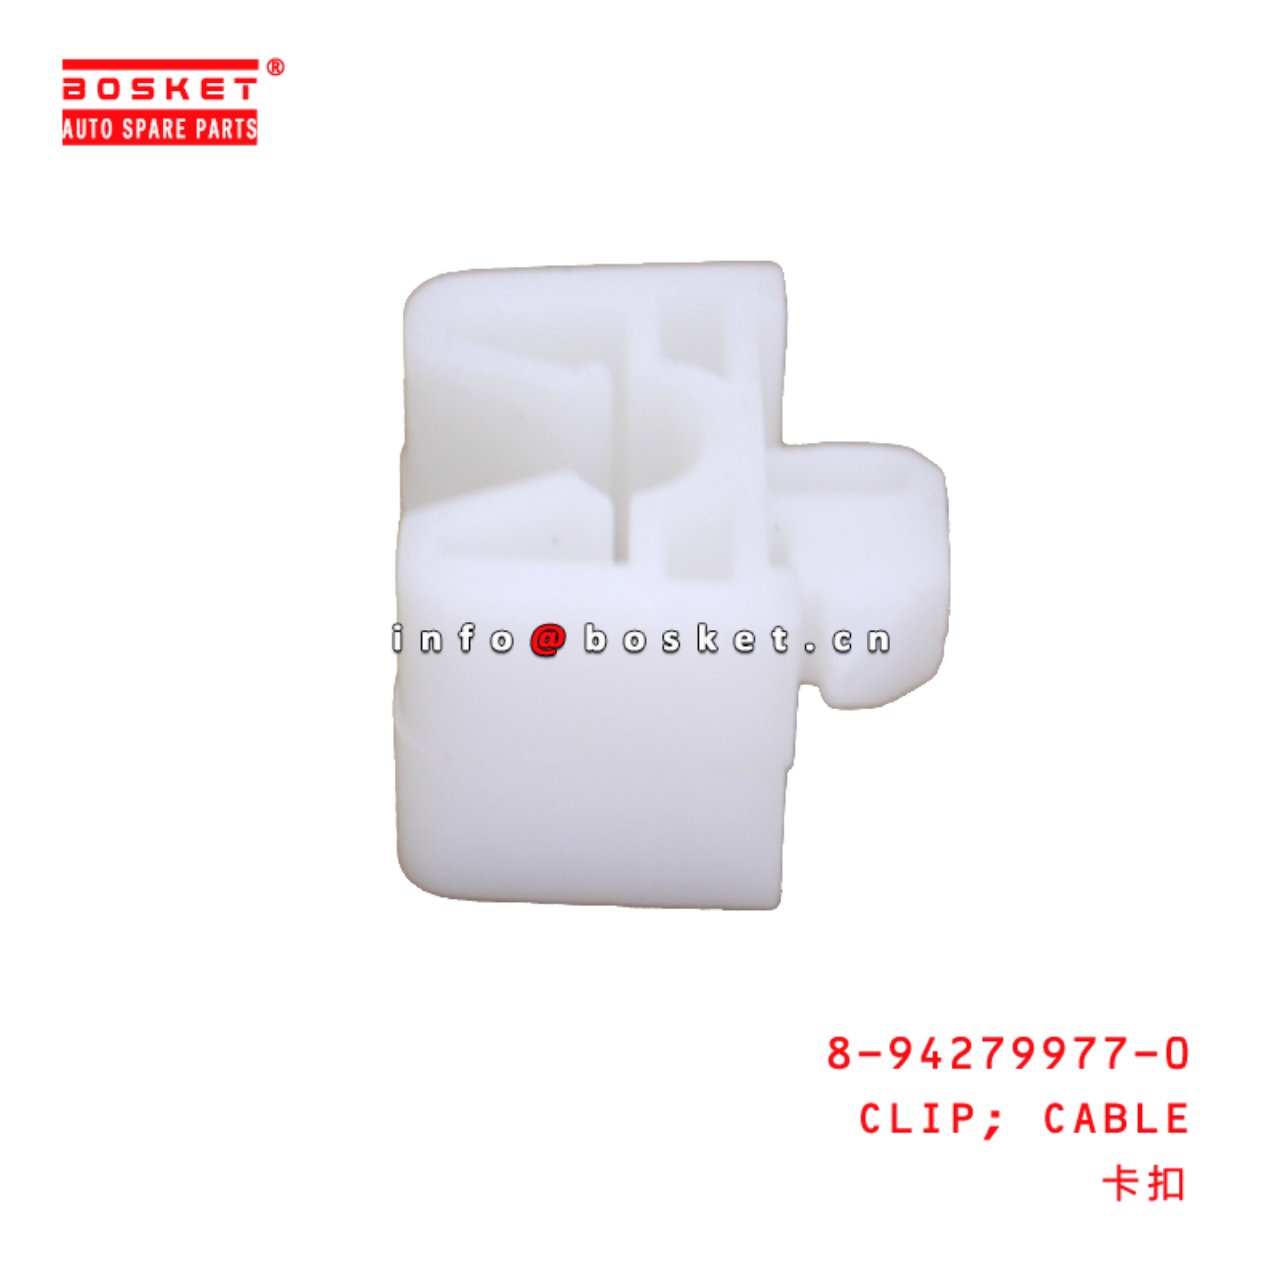 8-94279977-0 Cable Clip suitable for ISUZU NKR55 4JB1 8942799770